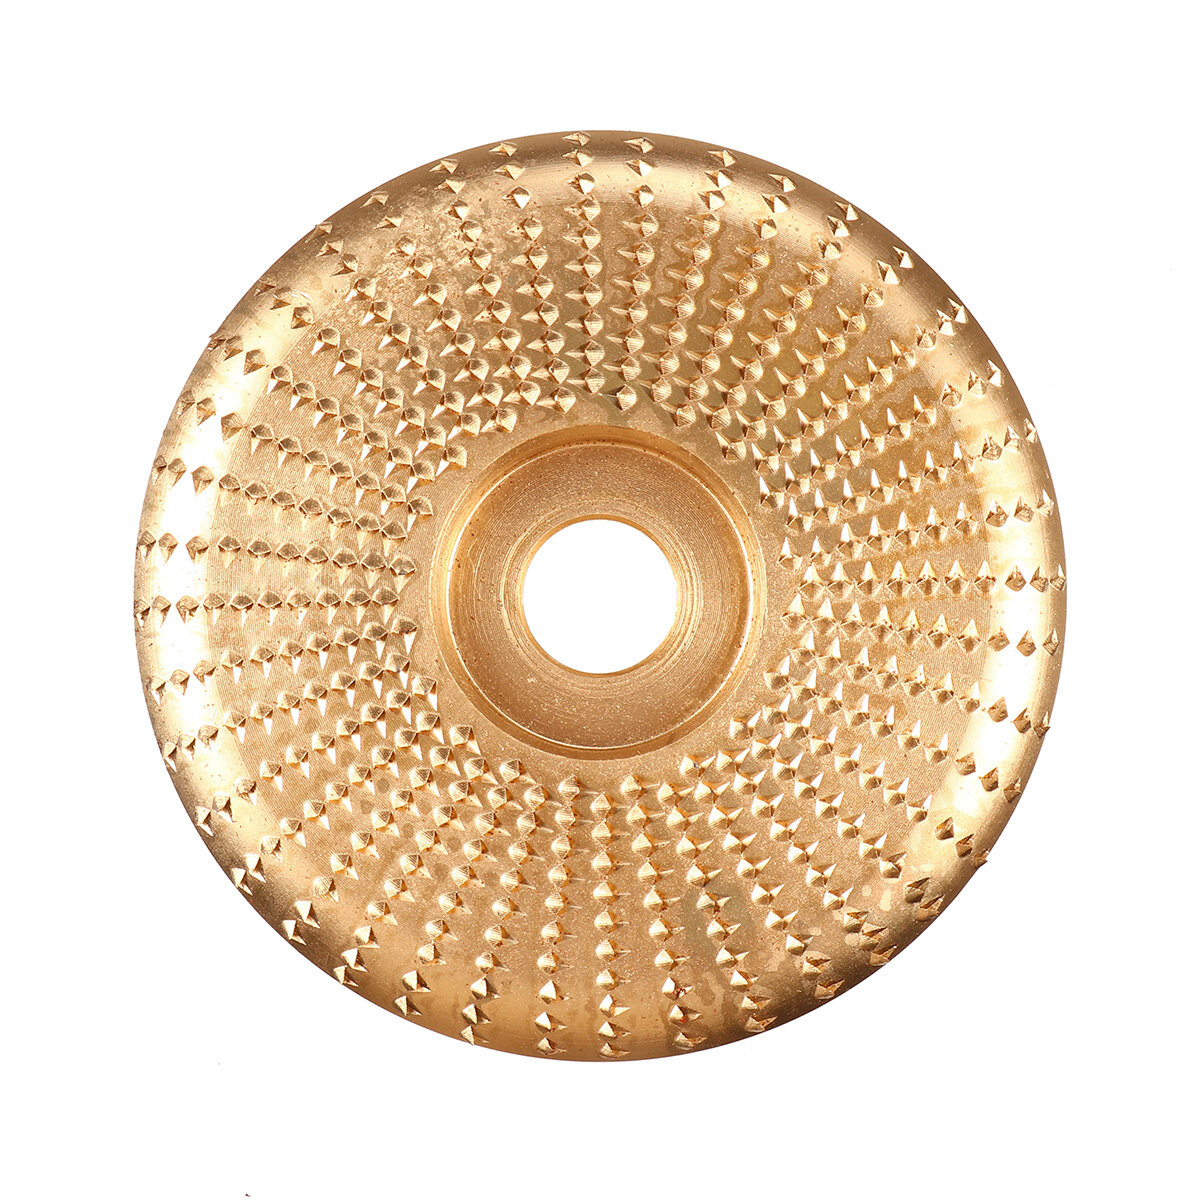 

100mm Carbide Wood Sanding Carving Shaping Disc for Angle Grinder Grinding Wheel